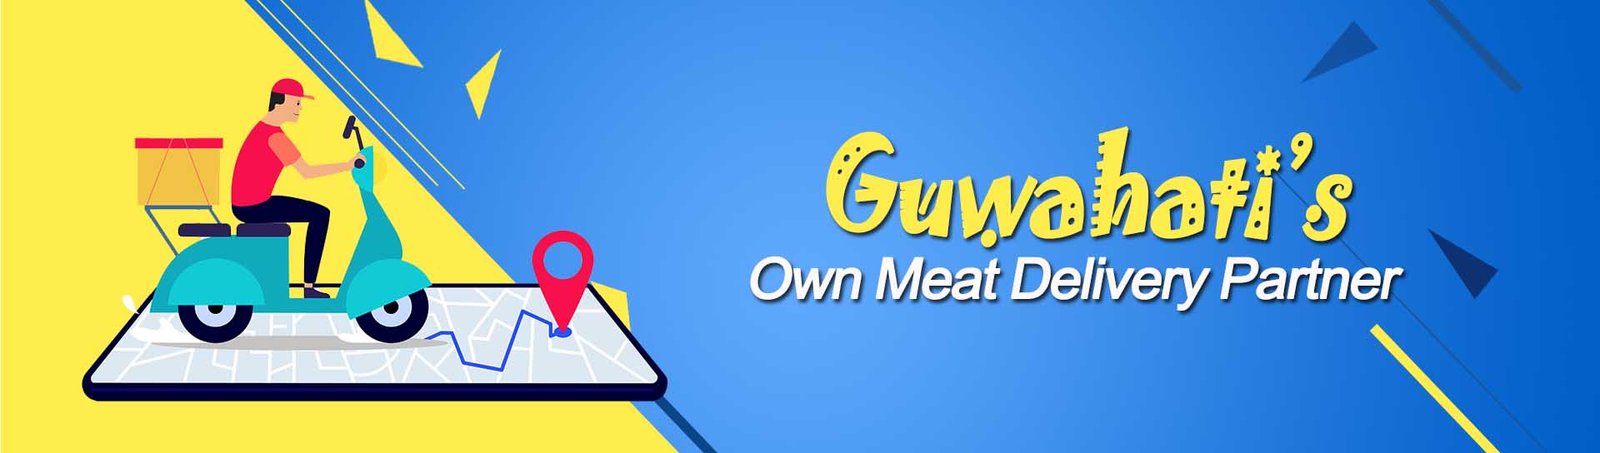 online meat delivery in guwahati, meat delivery in guwahati, Order meat online in Guwahati, Meat online in Guwahati, Seafods in Guwahati, Best seafoods in Guwahati, Fresh meat online in Guwahati